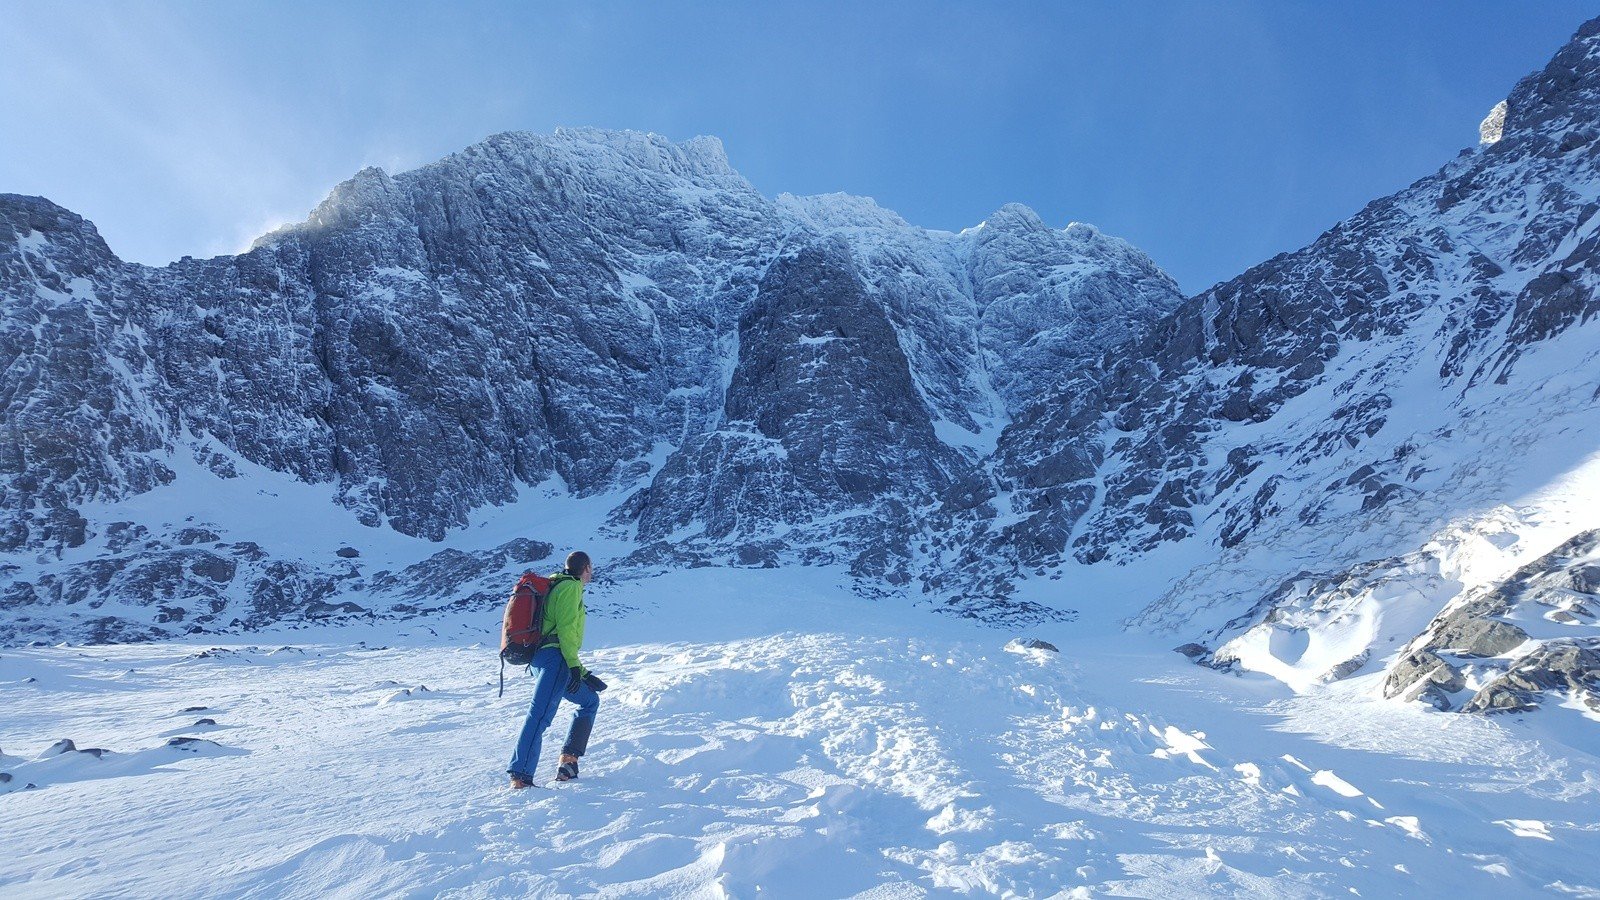 Heading out for a winter skills course on Ben Nevis